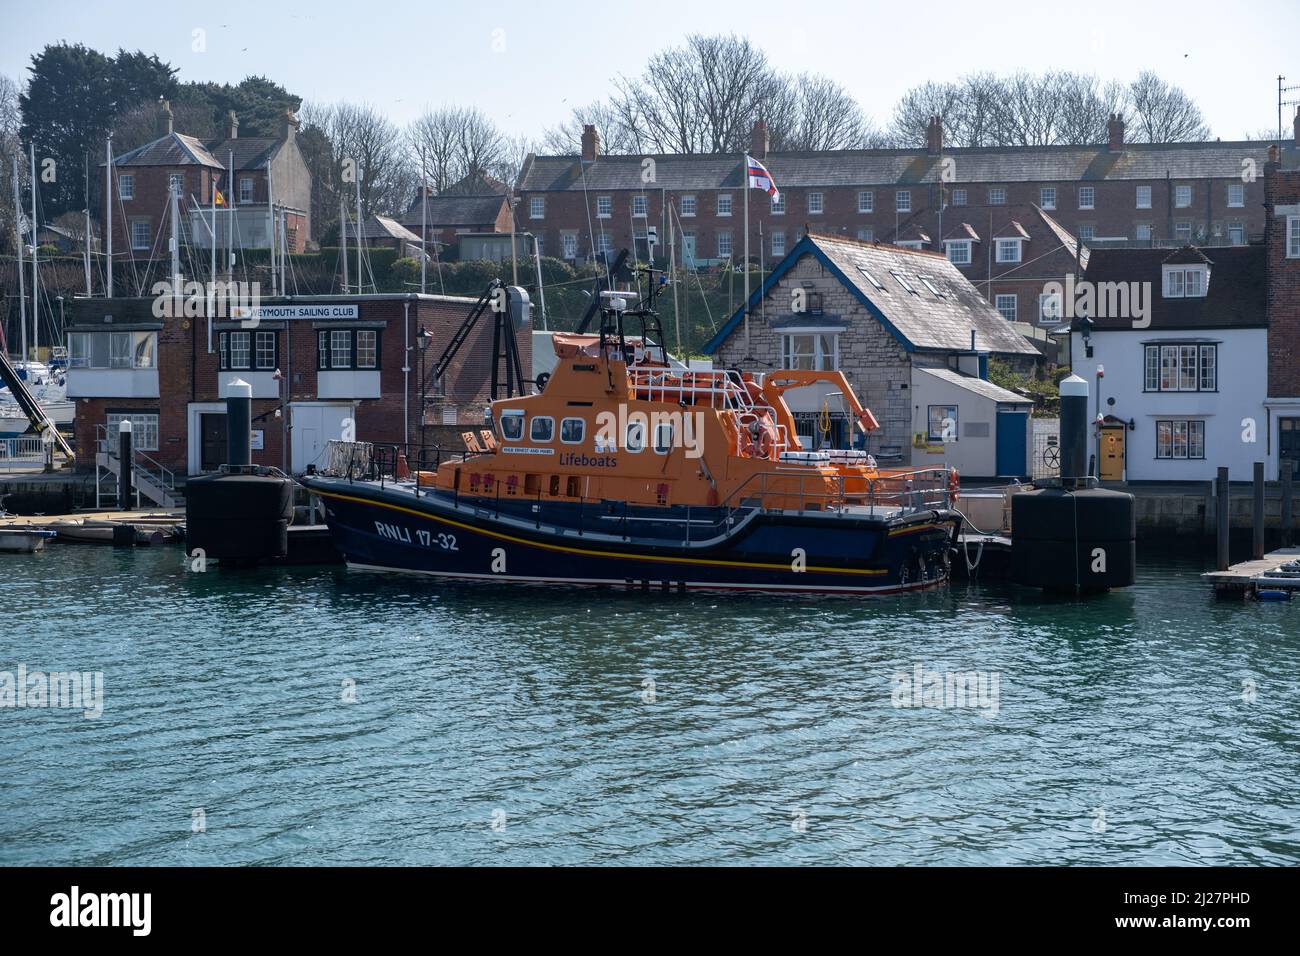 Royal National Life Boat vor Anker in Weymouth (März 22) Stockfoto